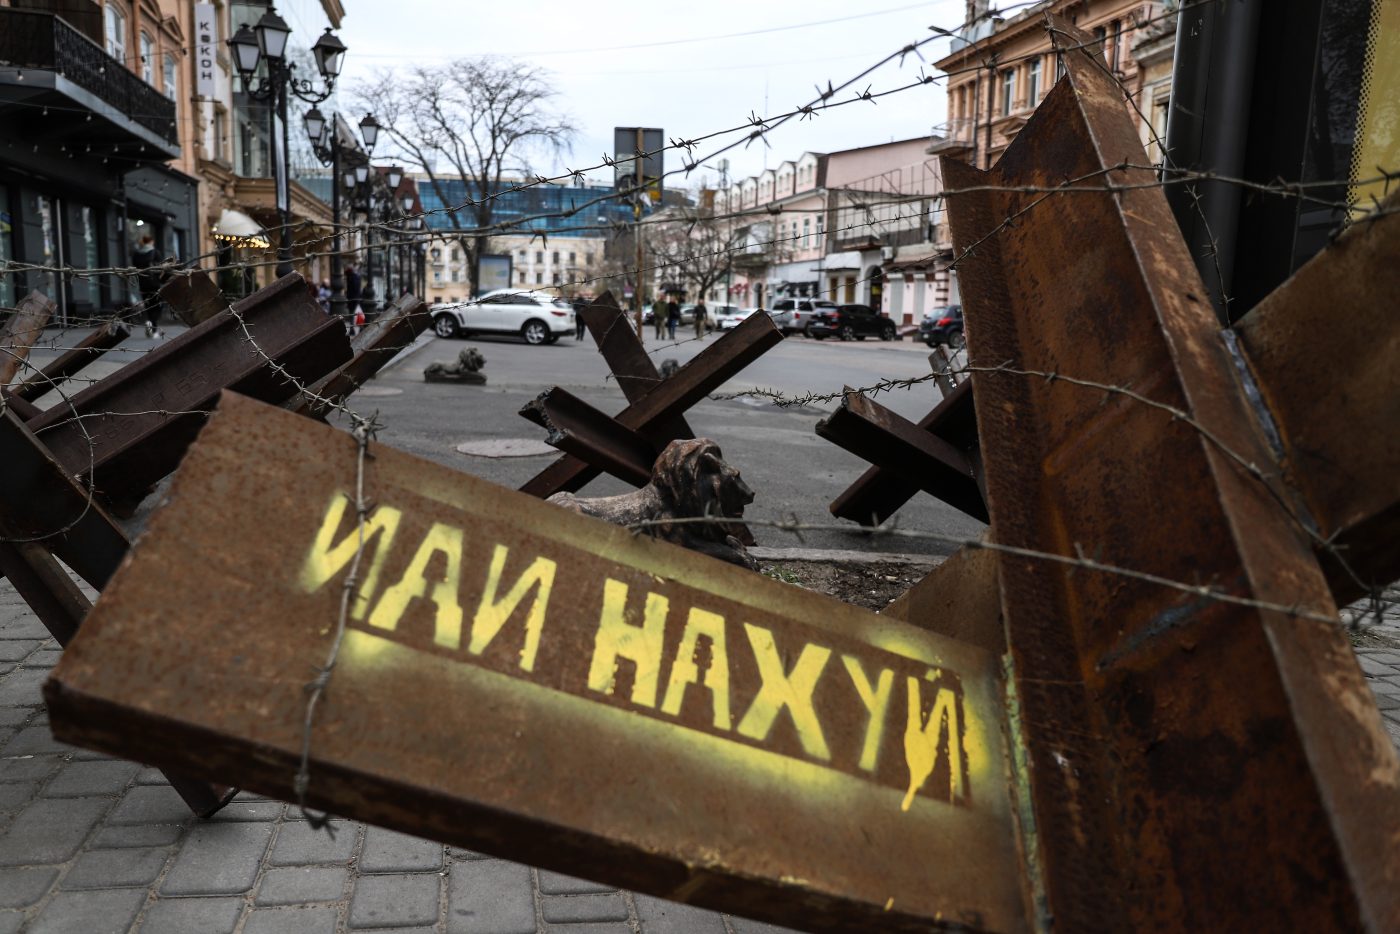 Photo: Odessa, Ukraine, 2022/04/14. Barricades and fortifications forbid the access to a street in the city center. Residents in Odessa fear to be the target of a Russian attack since the Russian navy ship Moskva was sunk by Ukrainian missiles off Odessa s coast. Credit: Photograph by Valeria Mongelli / Hans Lucas. Odessa, Ukraine, 2022/04/14.